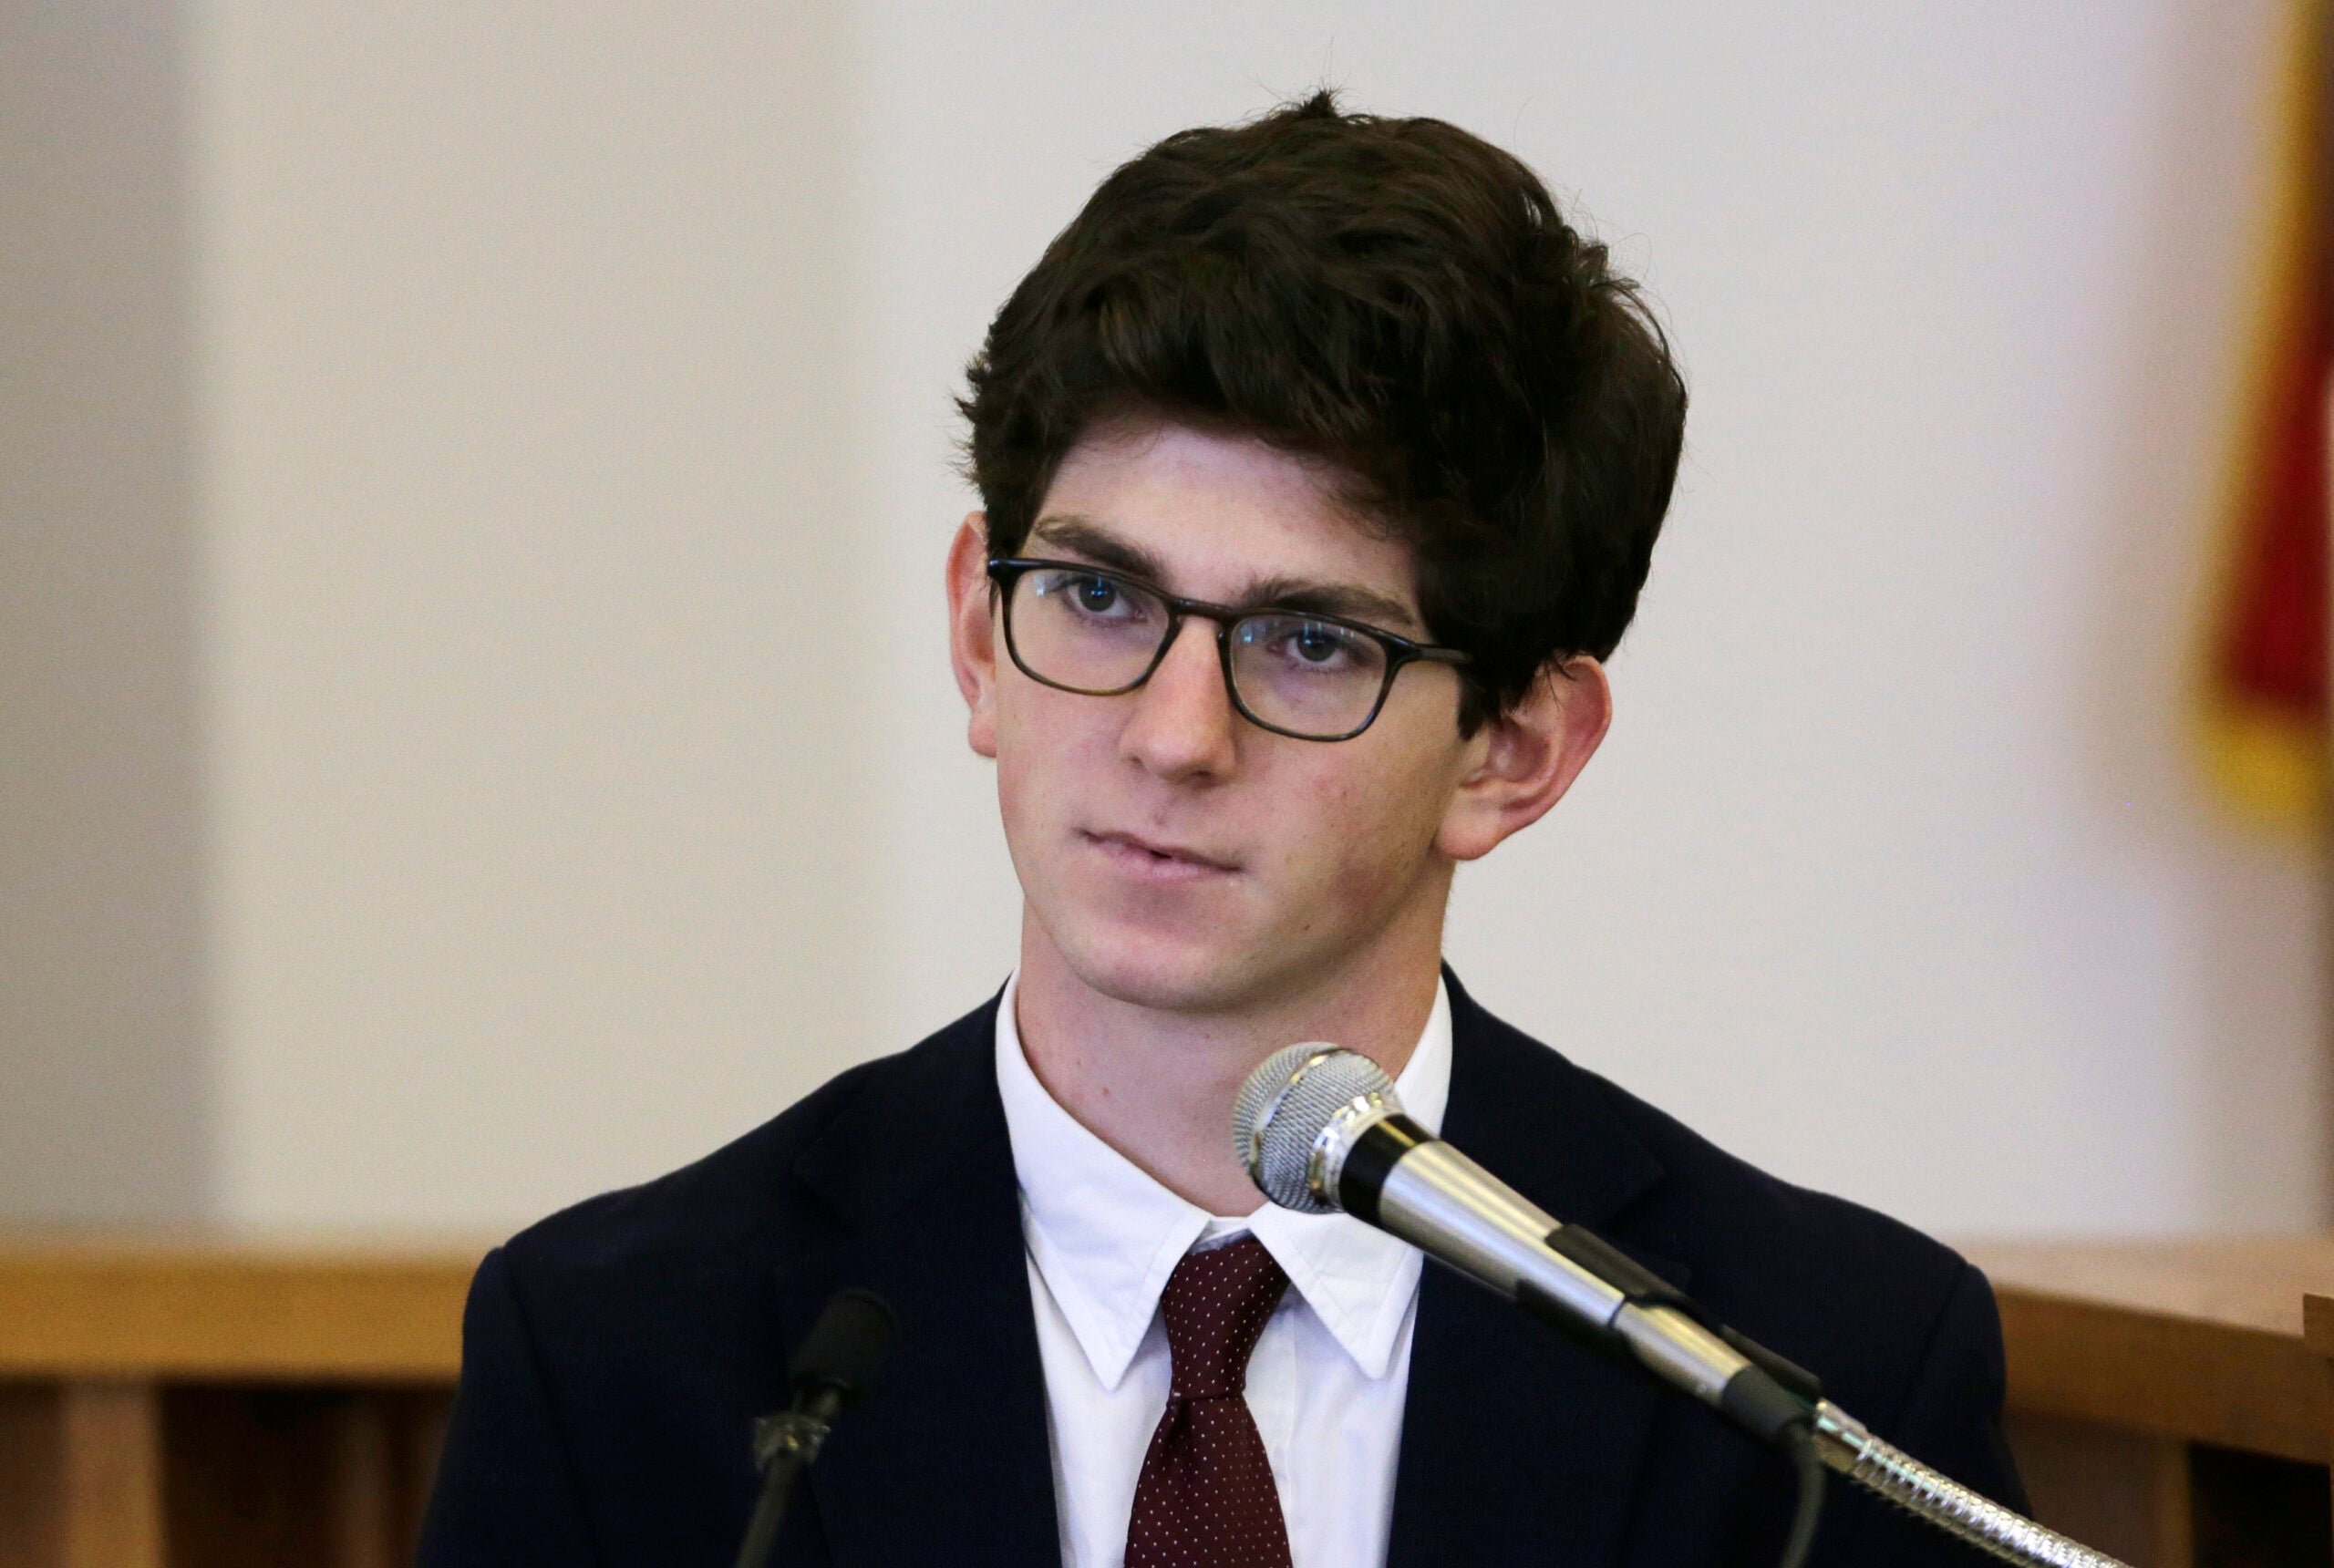 Owen Labrie Convicted In Prep School Sex Case Wants A New Trial 7507